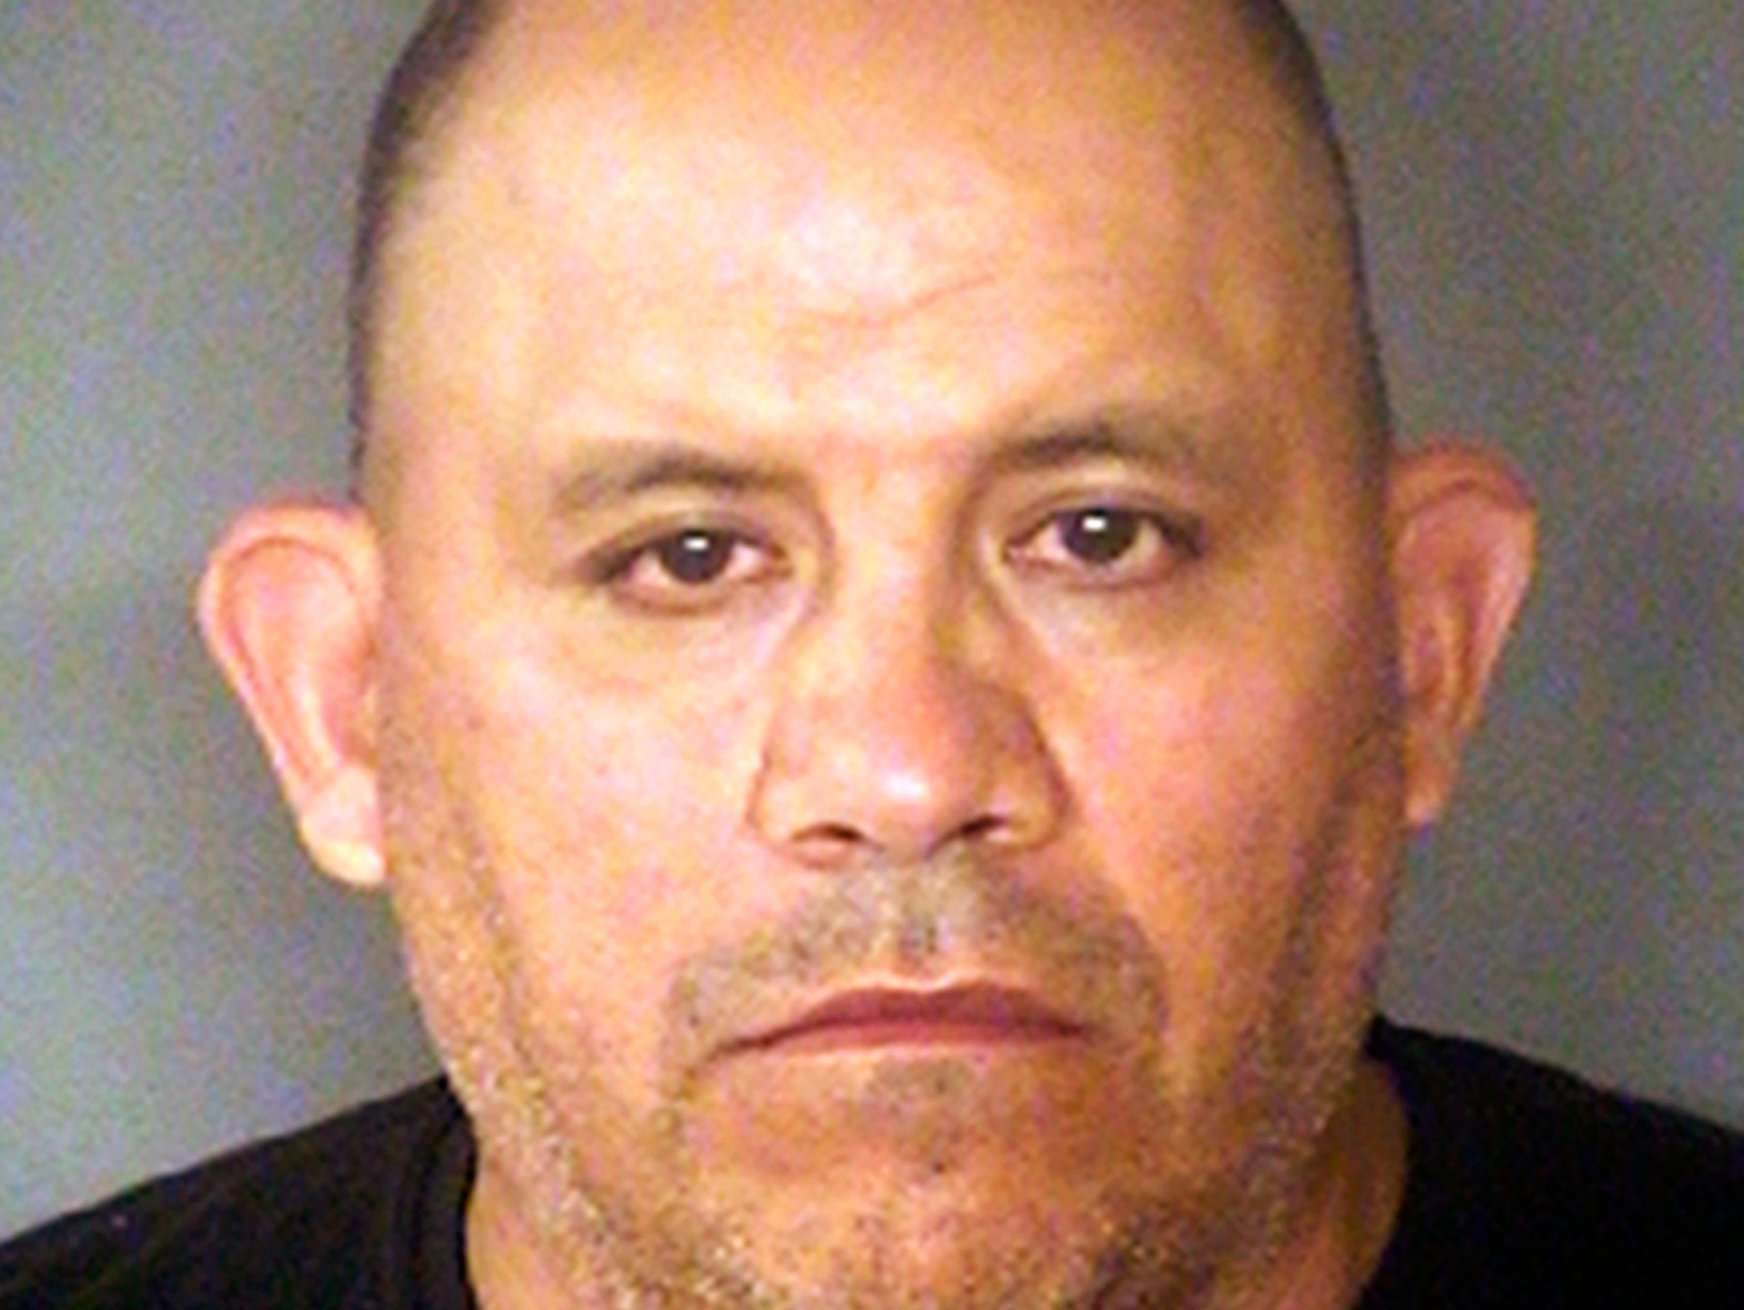 image for Policeman sexually assaulted 4-year-old child of undocumented immigrant, sheriff says